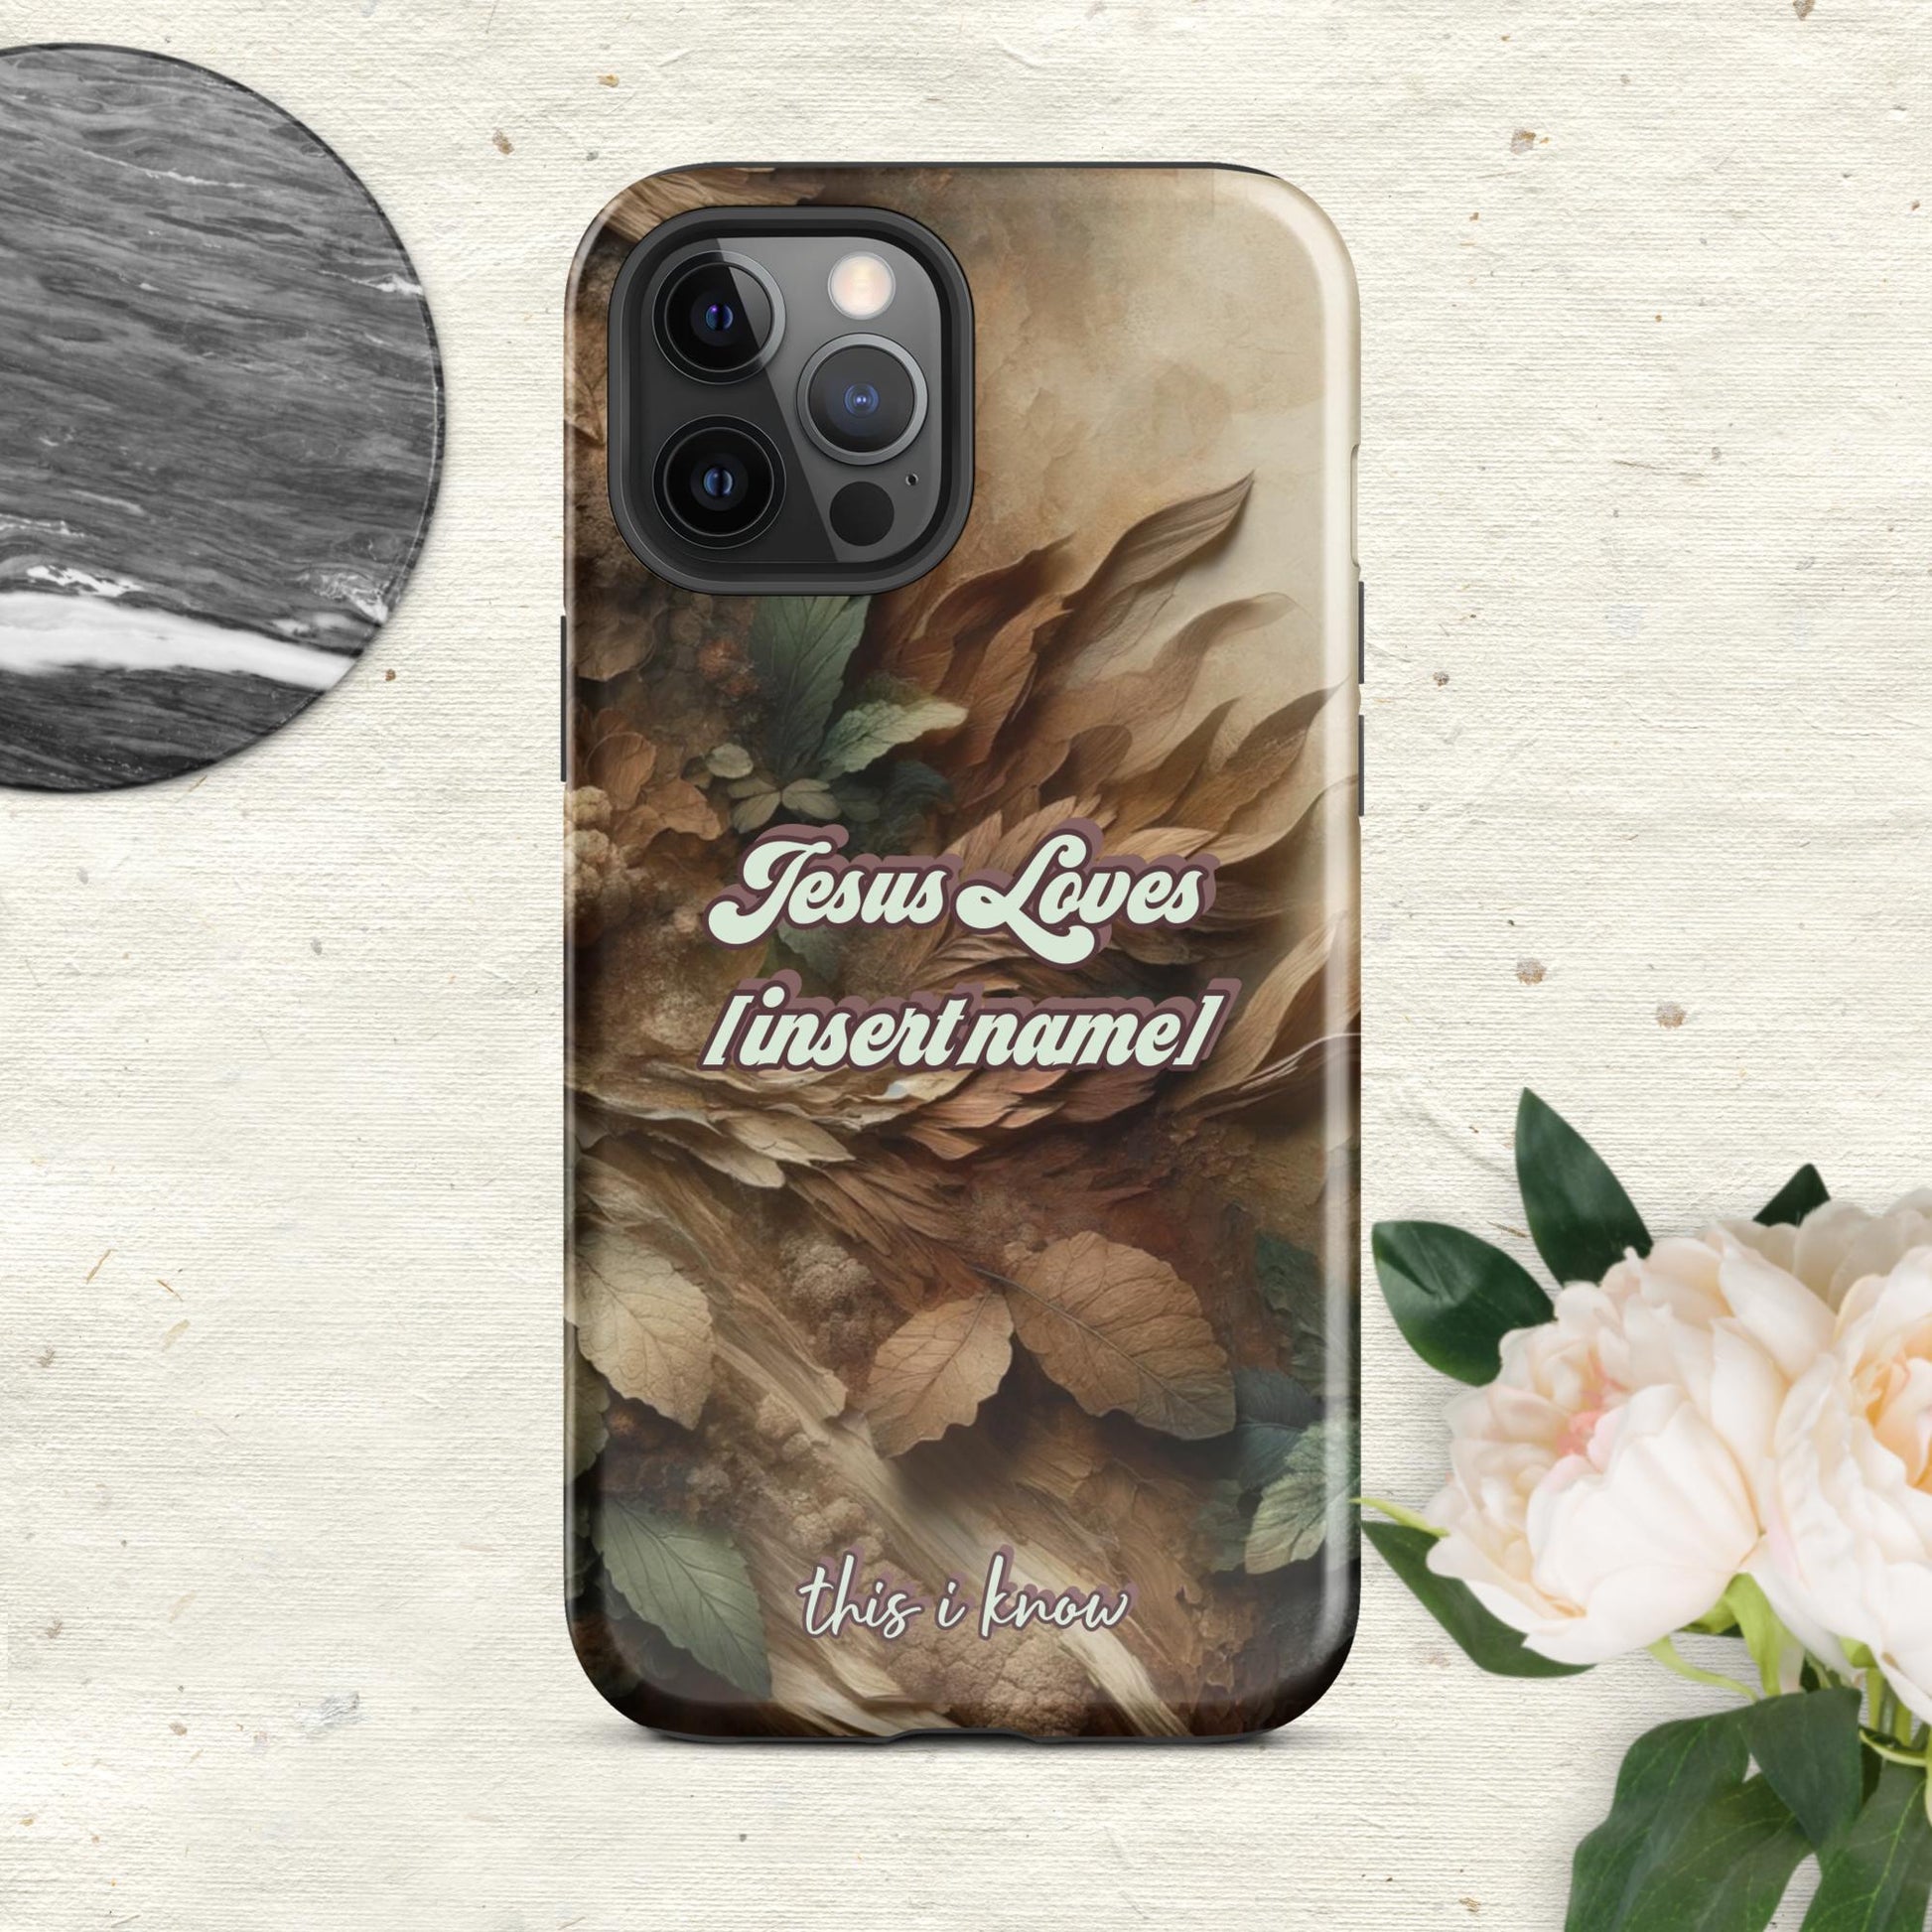 Trendyguard Glossy / iPhone 12 Pro Max Jesus Loves [insertname] This I Know | Custom Tough Case for iPhone®